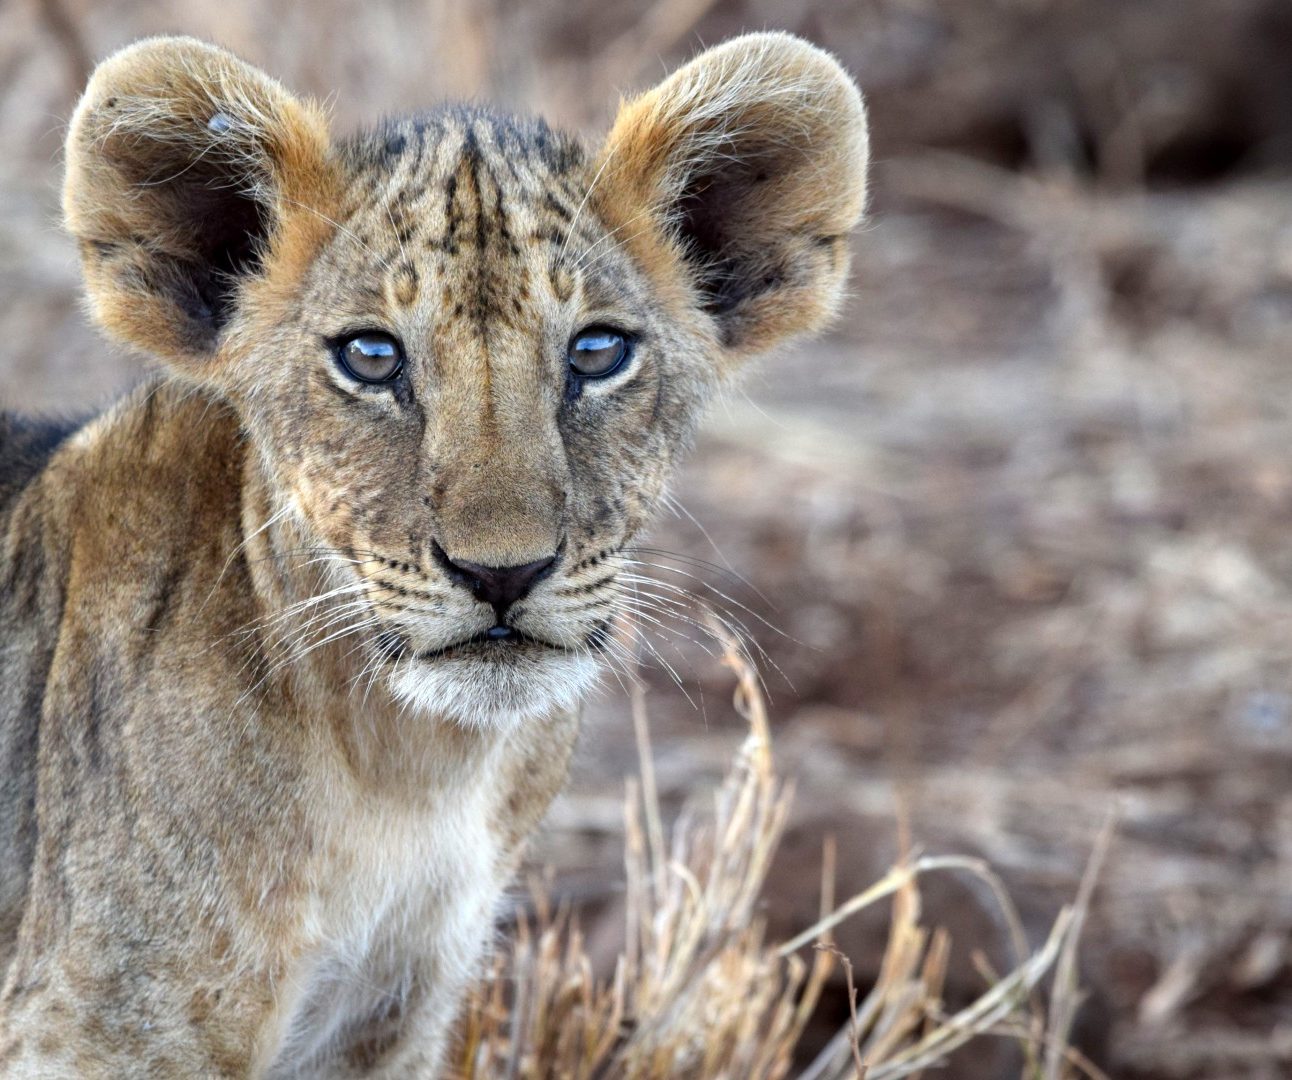 A young wild lion cub staring directly at the camera